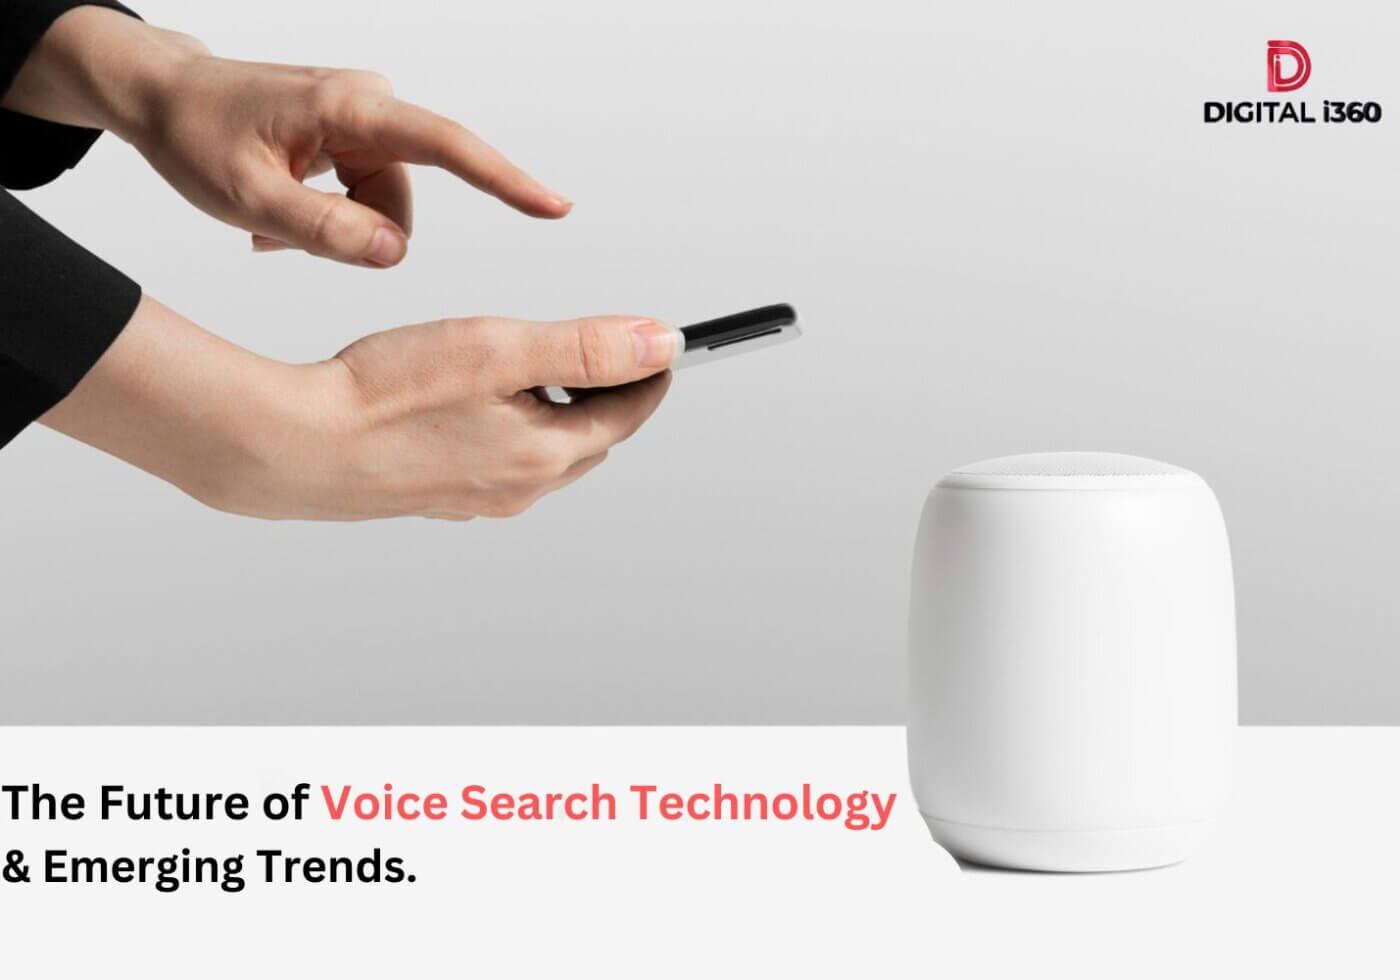 The Future of Voice Search Technology & Emerging Trends blog